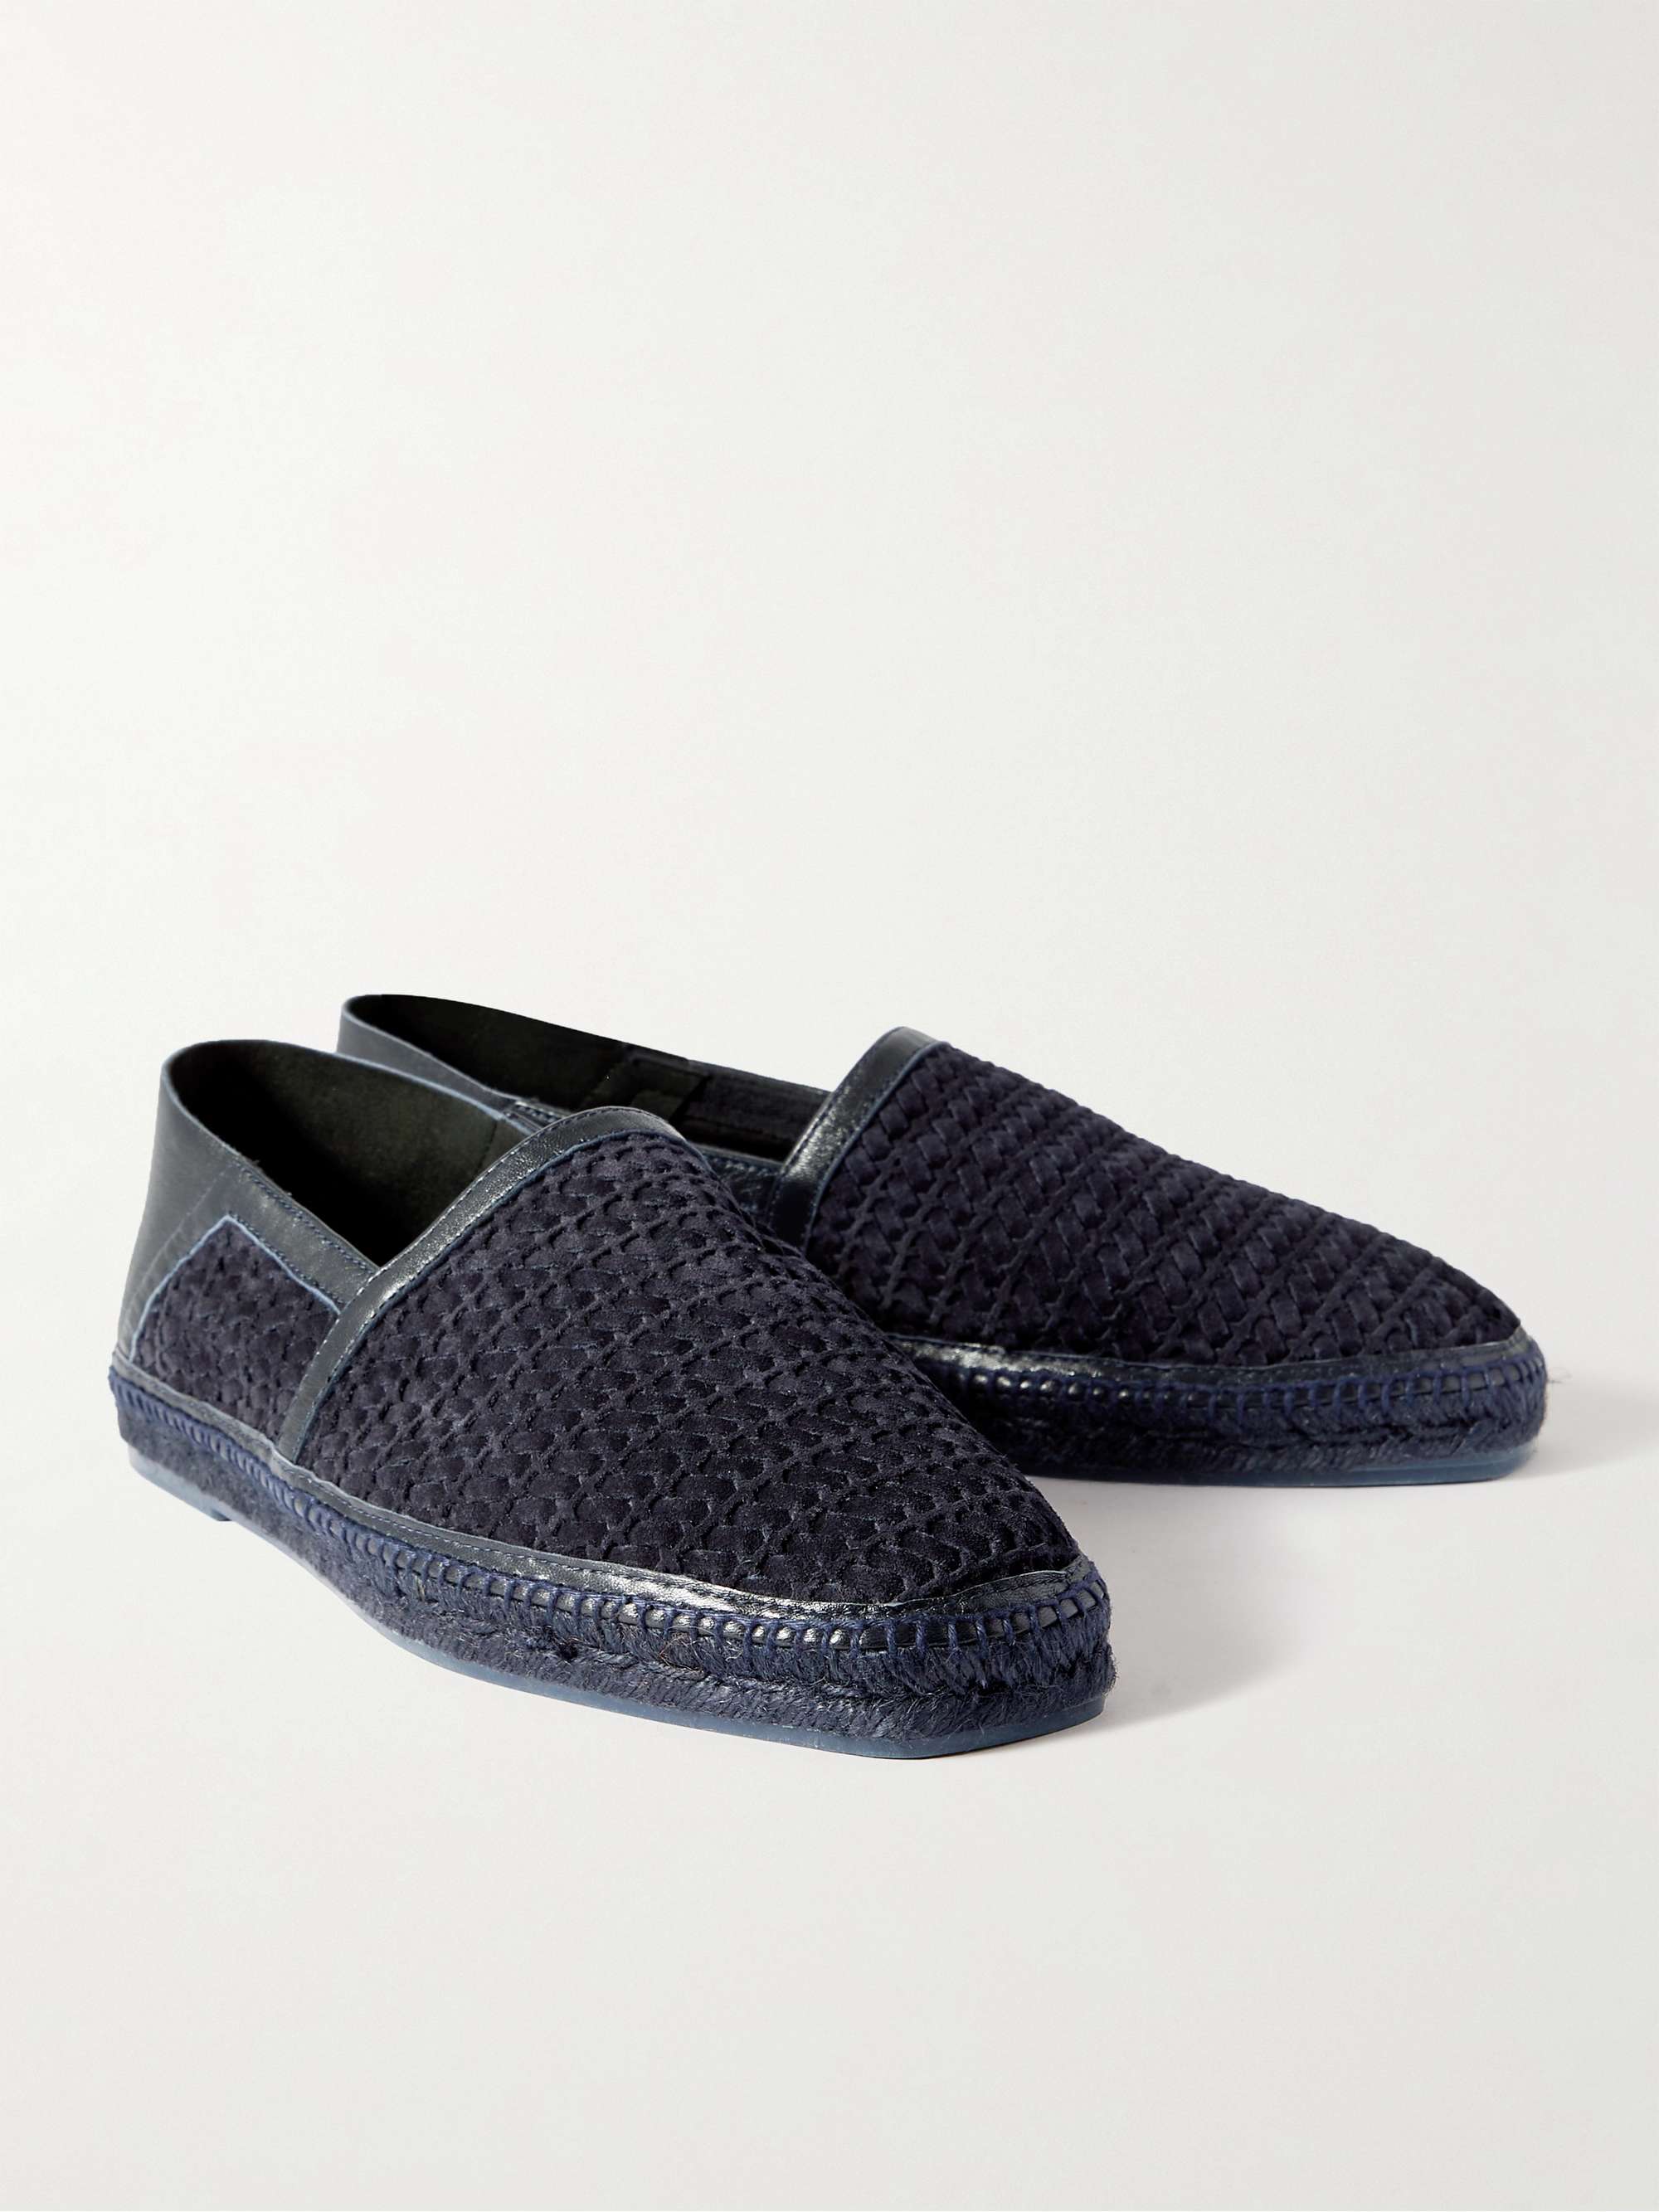 TOM FORD Barnes Collapsible-Heel Woven Suede and Leather Espadrilles